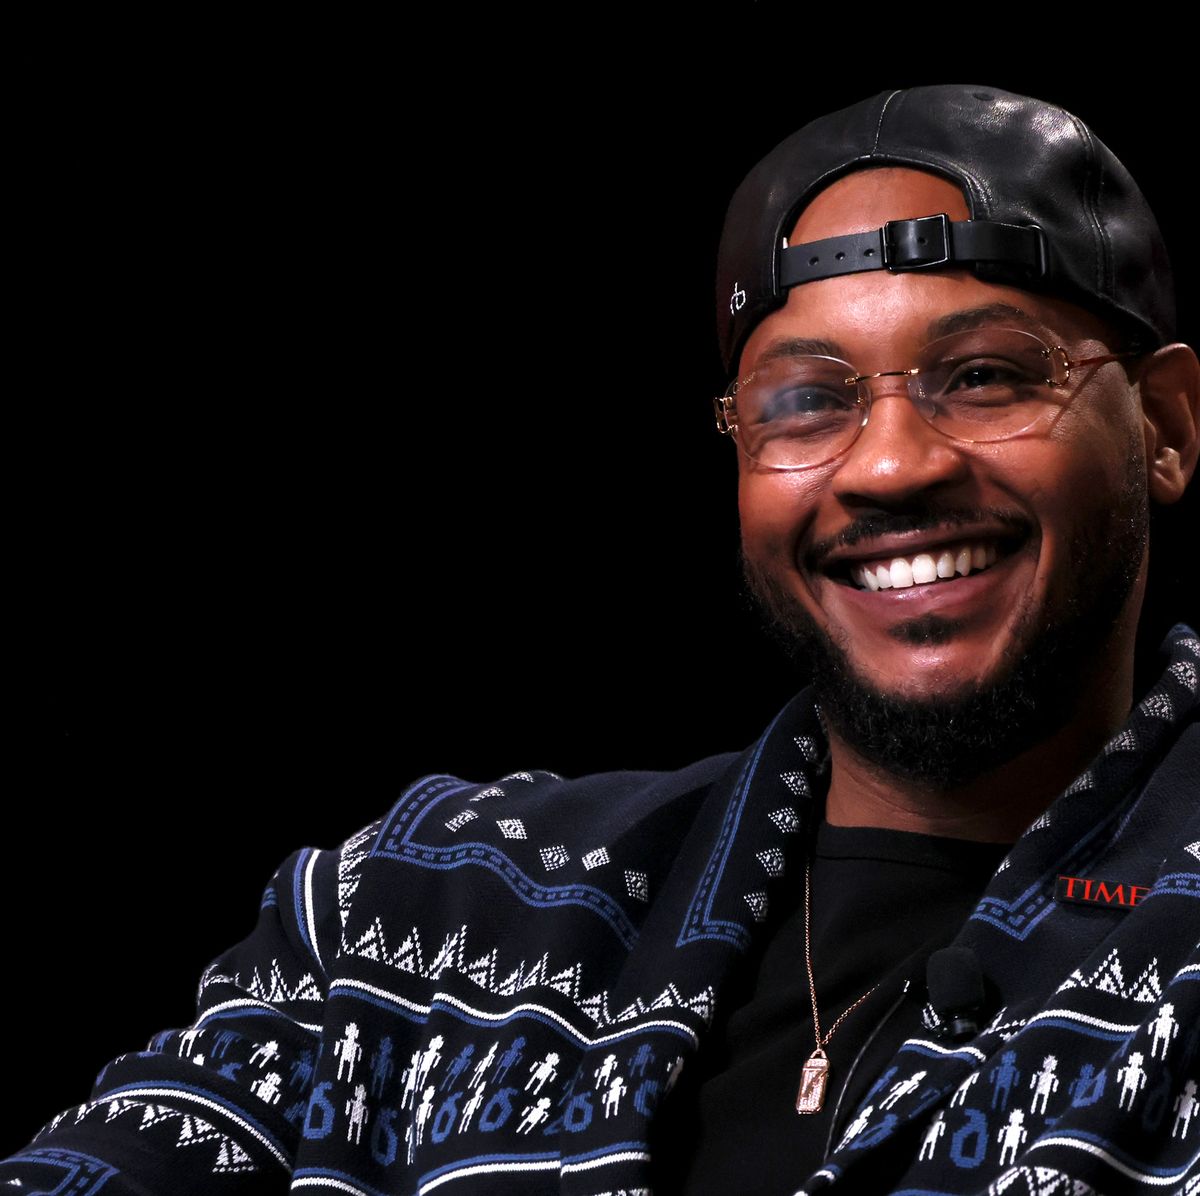 https://hips.hearstapps.com/hmg-prod/images/carmelo-anthony-speaks-onstage-at-the-2023-time100-summit-news-photo-1684771160.jpg?crop=0.471xw:0.704xh;0.402xw,0.0168xh&resize=1200:*